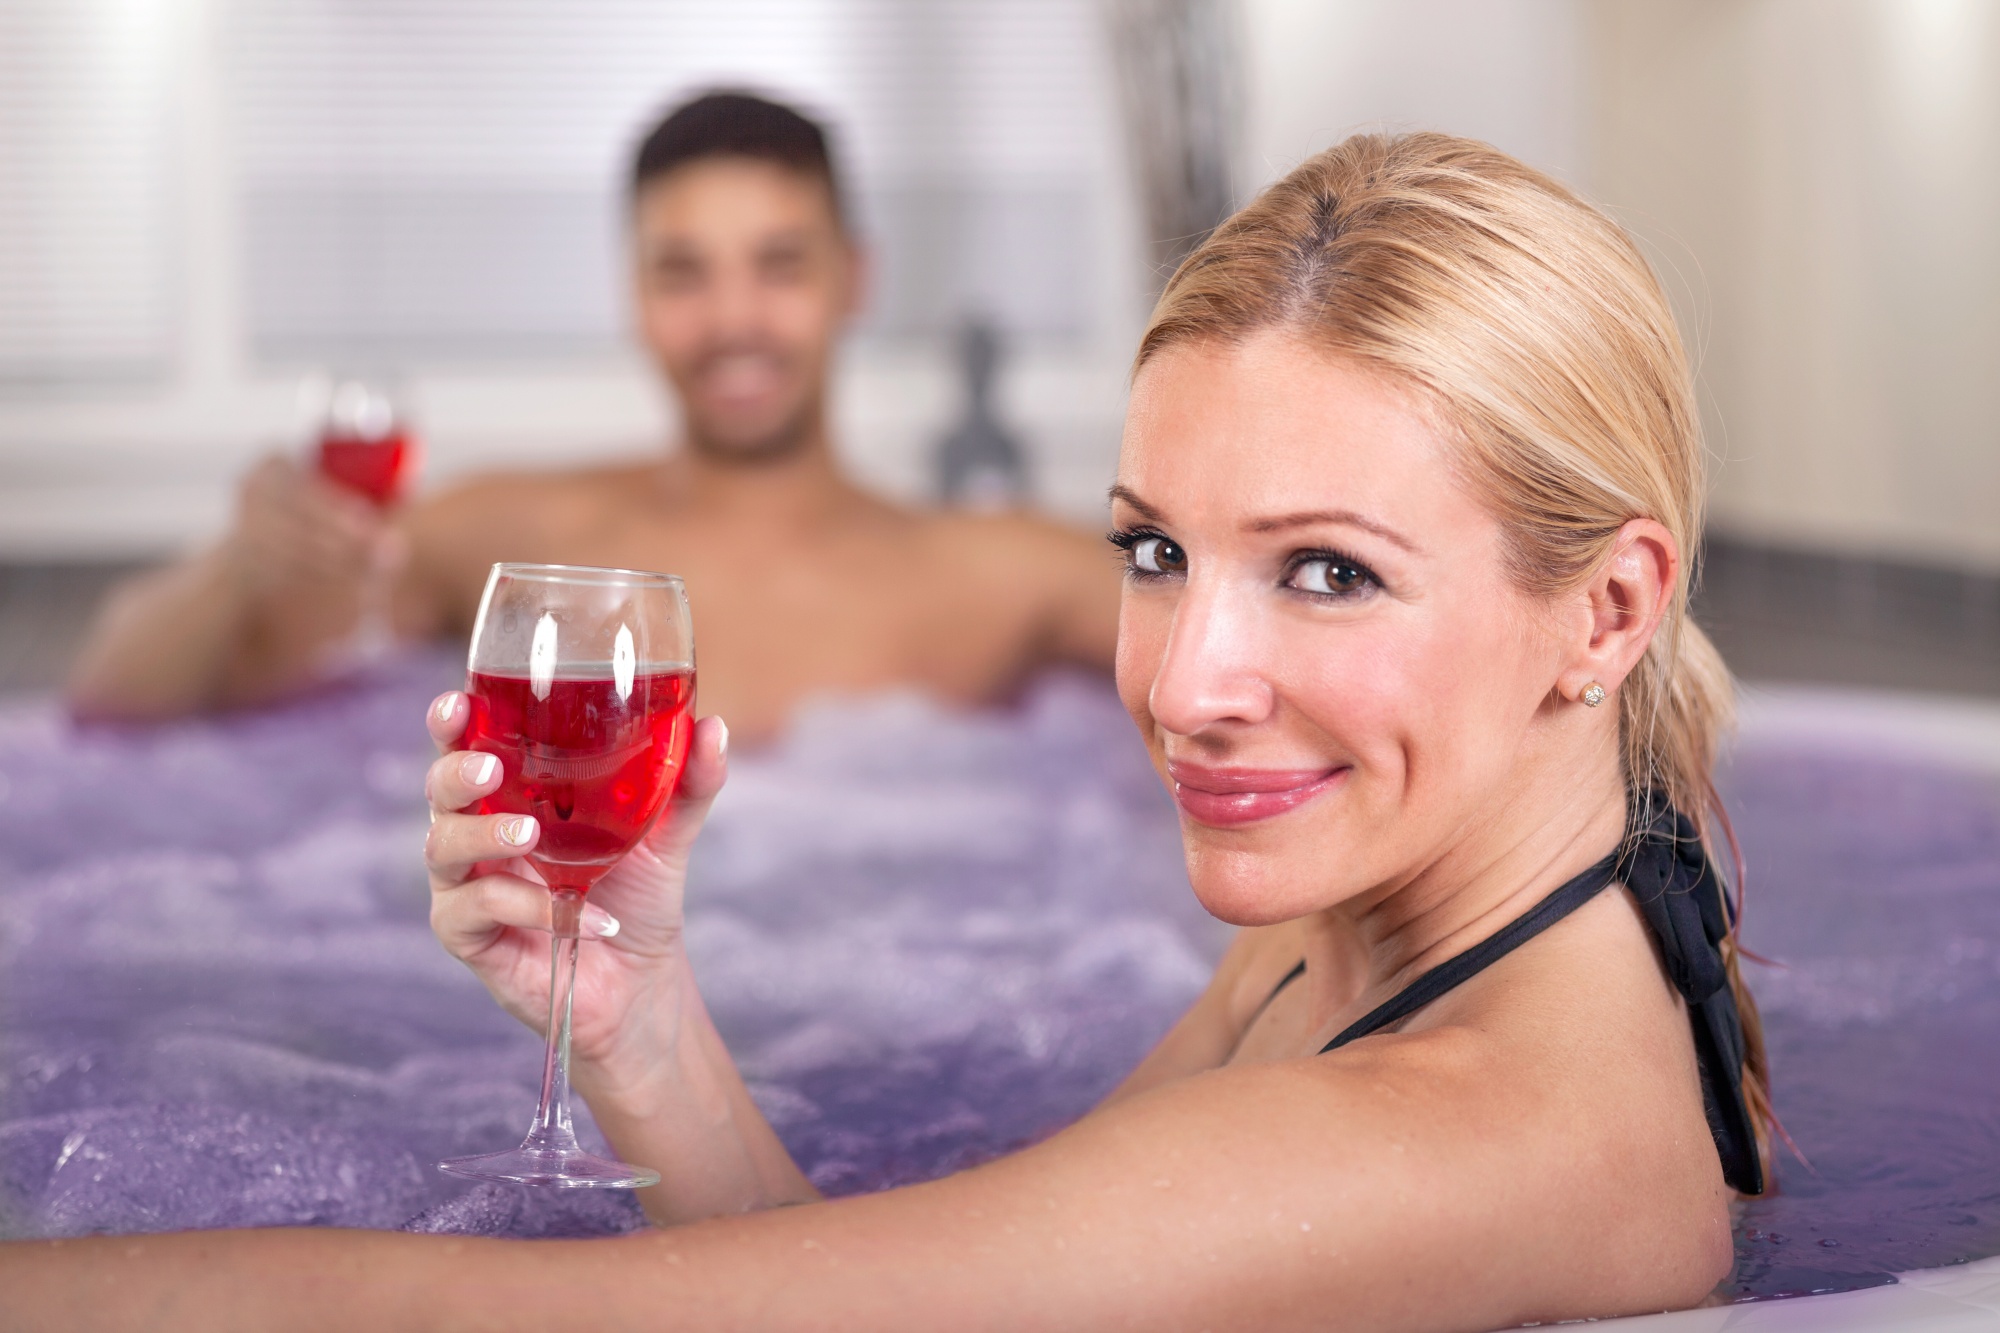 Let's Talk About Sex: When Being Too Busy Interferes With "Getting Busy". Blonde woman drinking red wine with man in hot tub